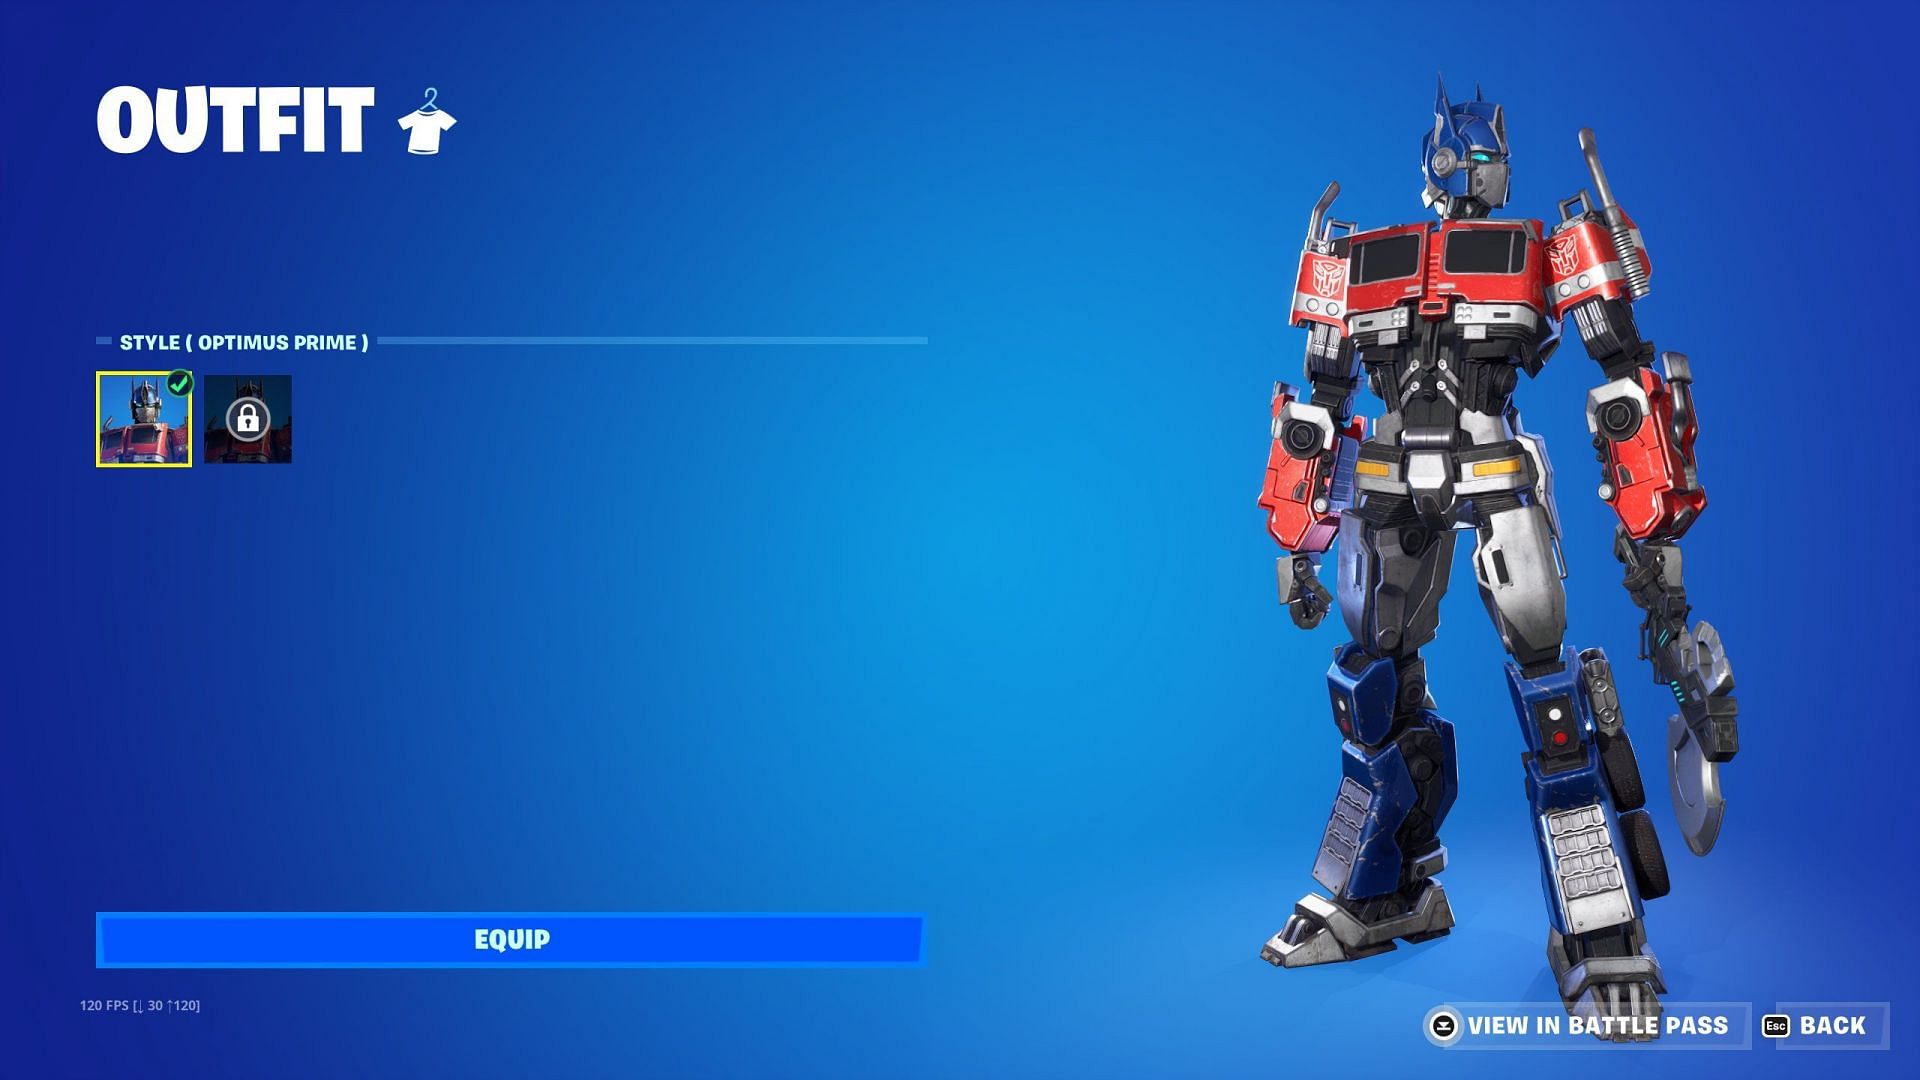 How to get the Optimus Prime skin in Fortnite